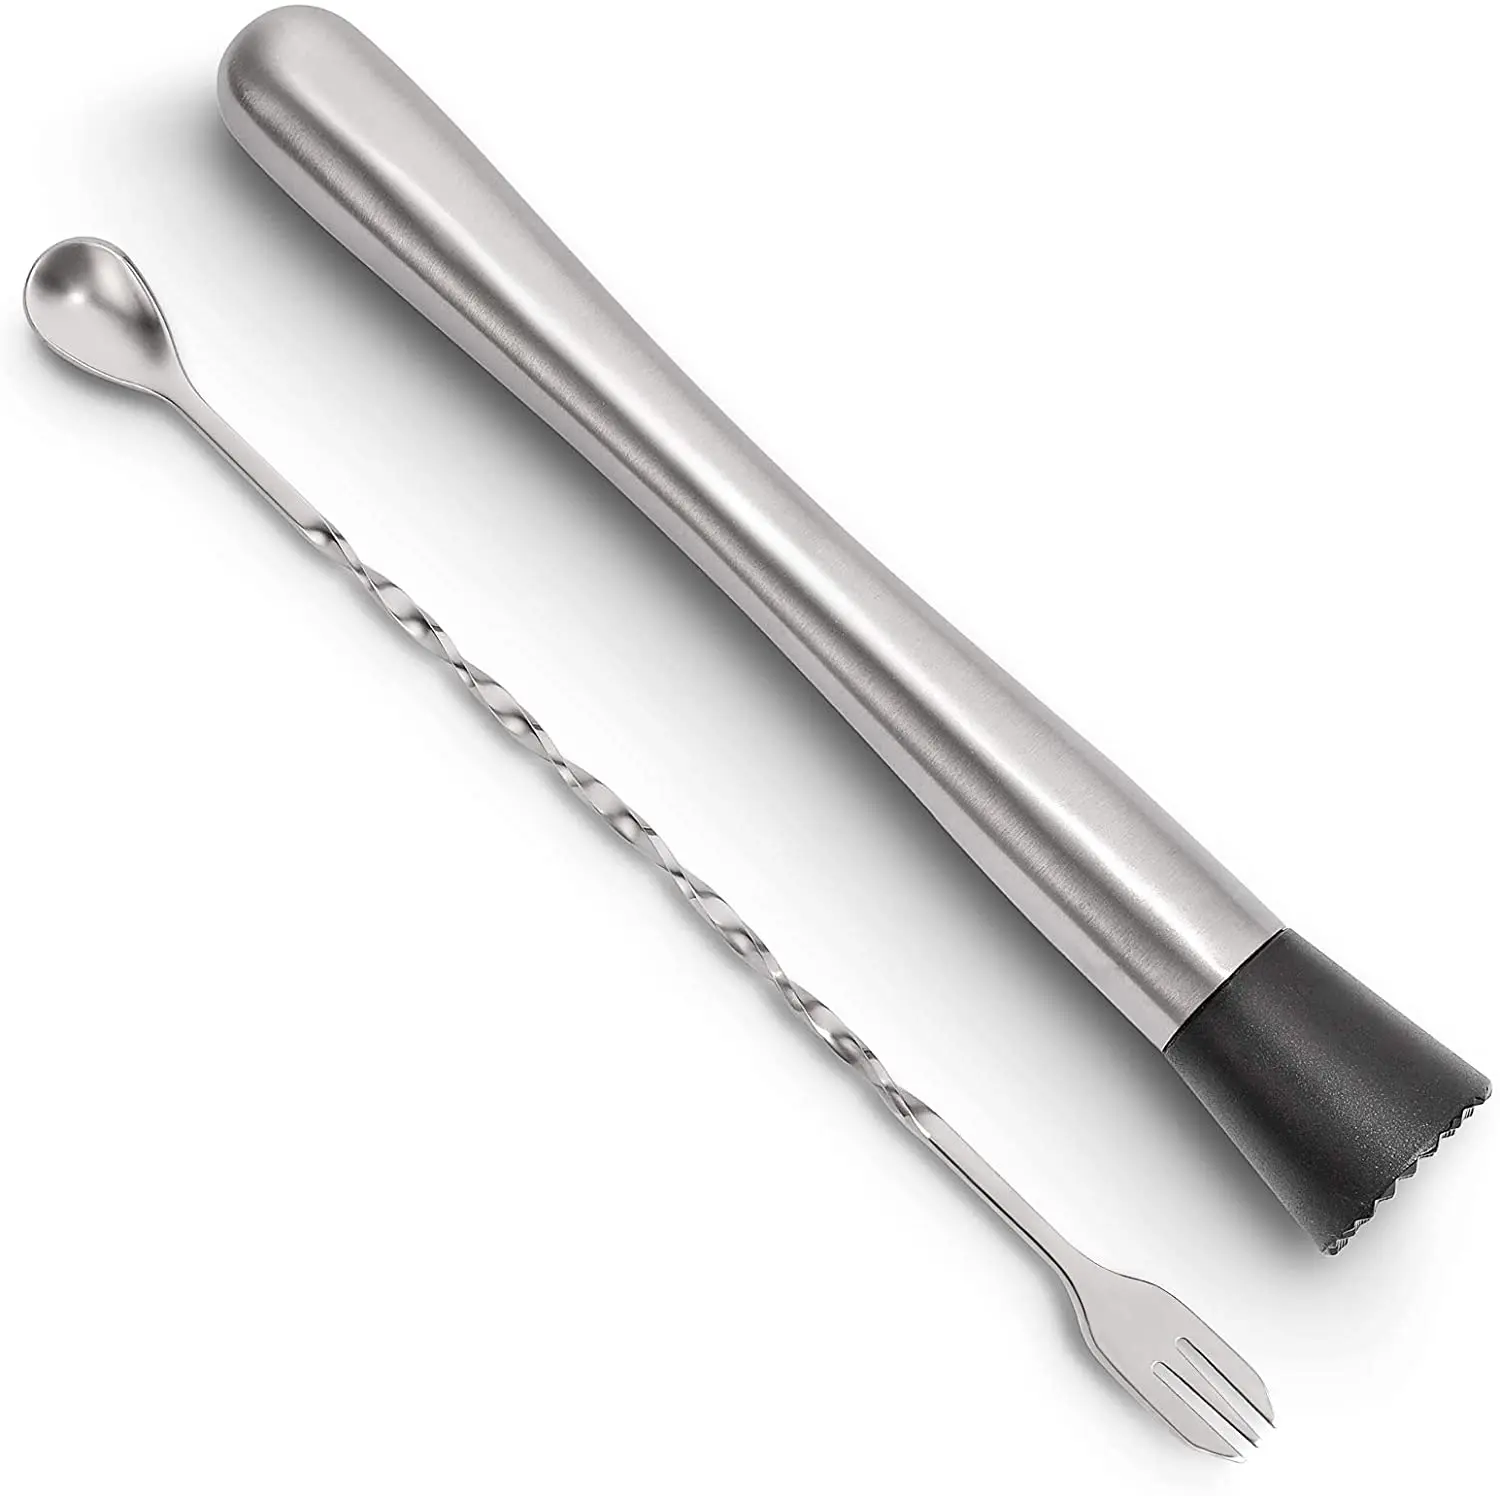 PHITUODA 2pcs 9 inch Stainless Steel Cocktail Muddler Bar Tool for Old Fashioned & Mojitos Drink 